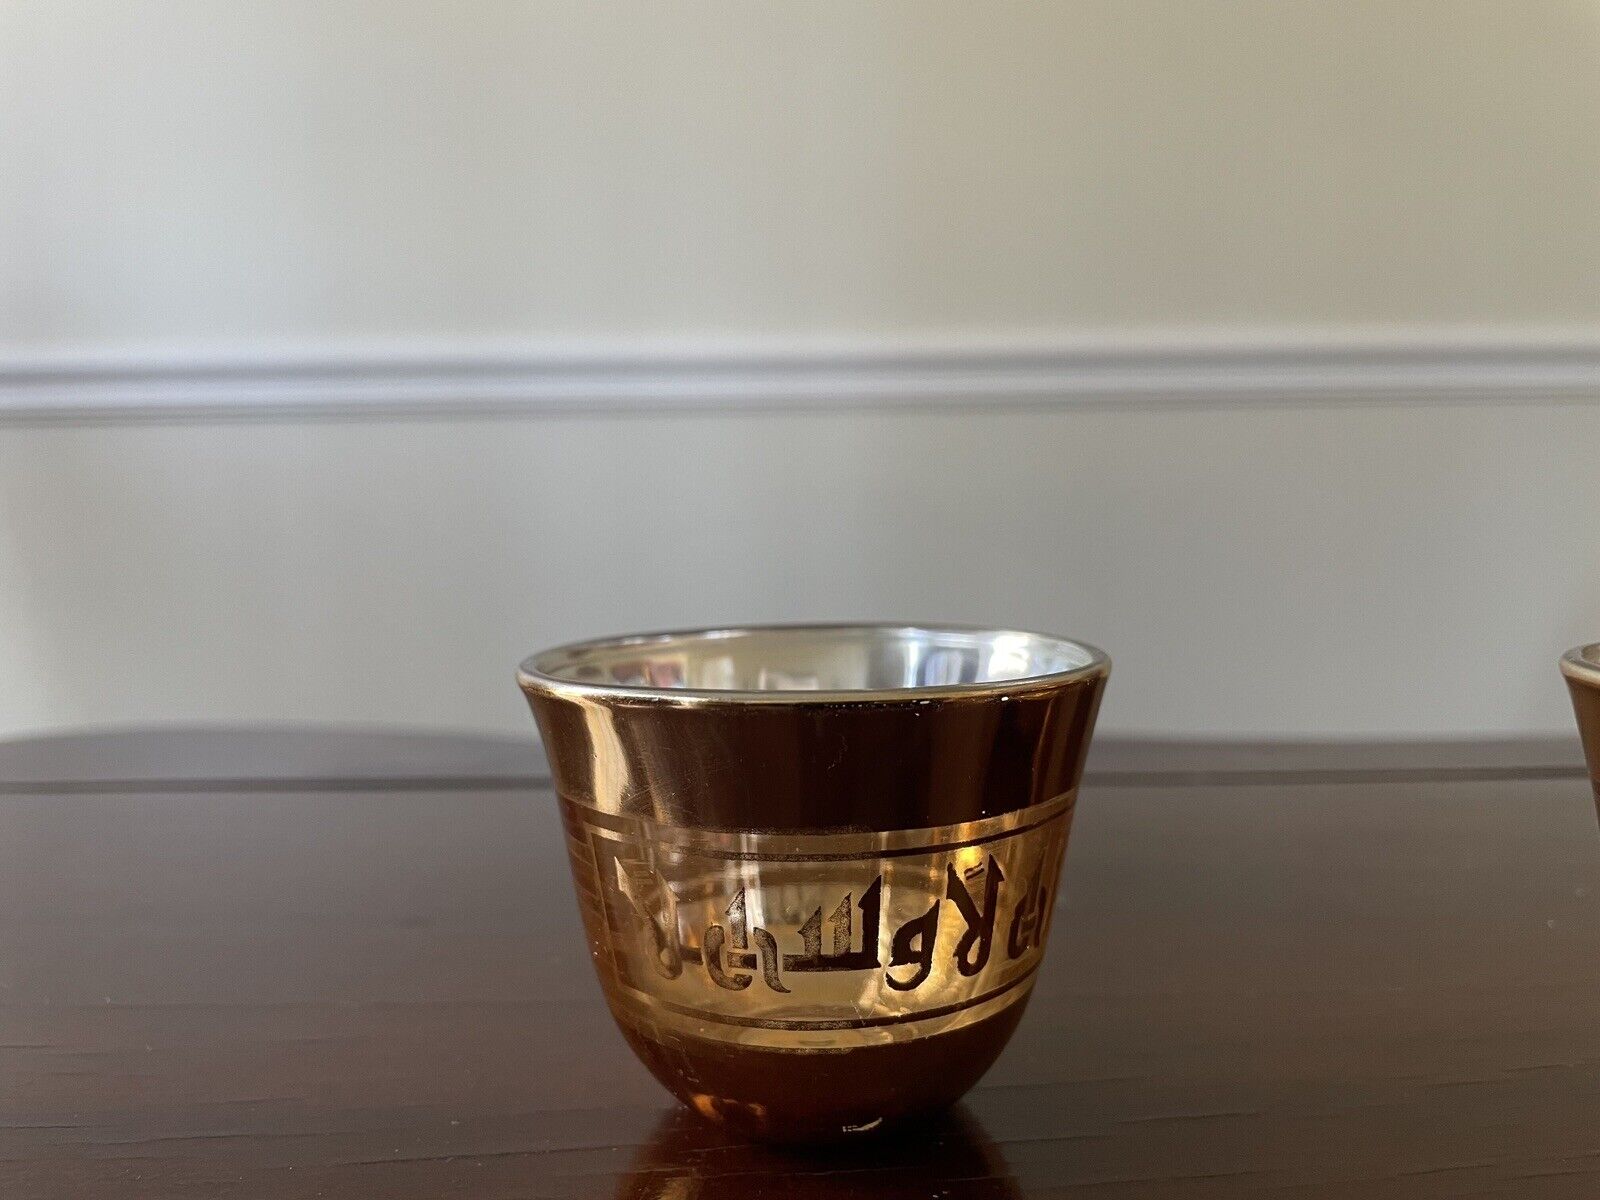 8 - Arabic/Moroccan Style Glasses with Gold Overlay For Tea Or Liquor